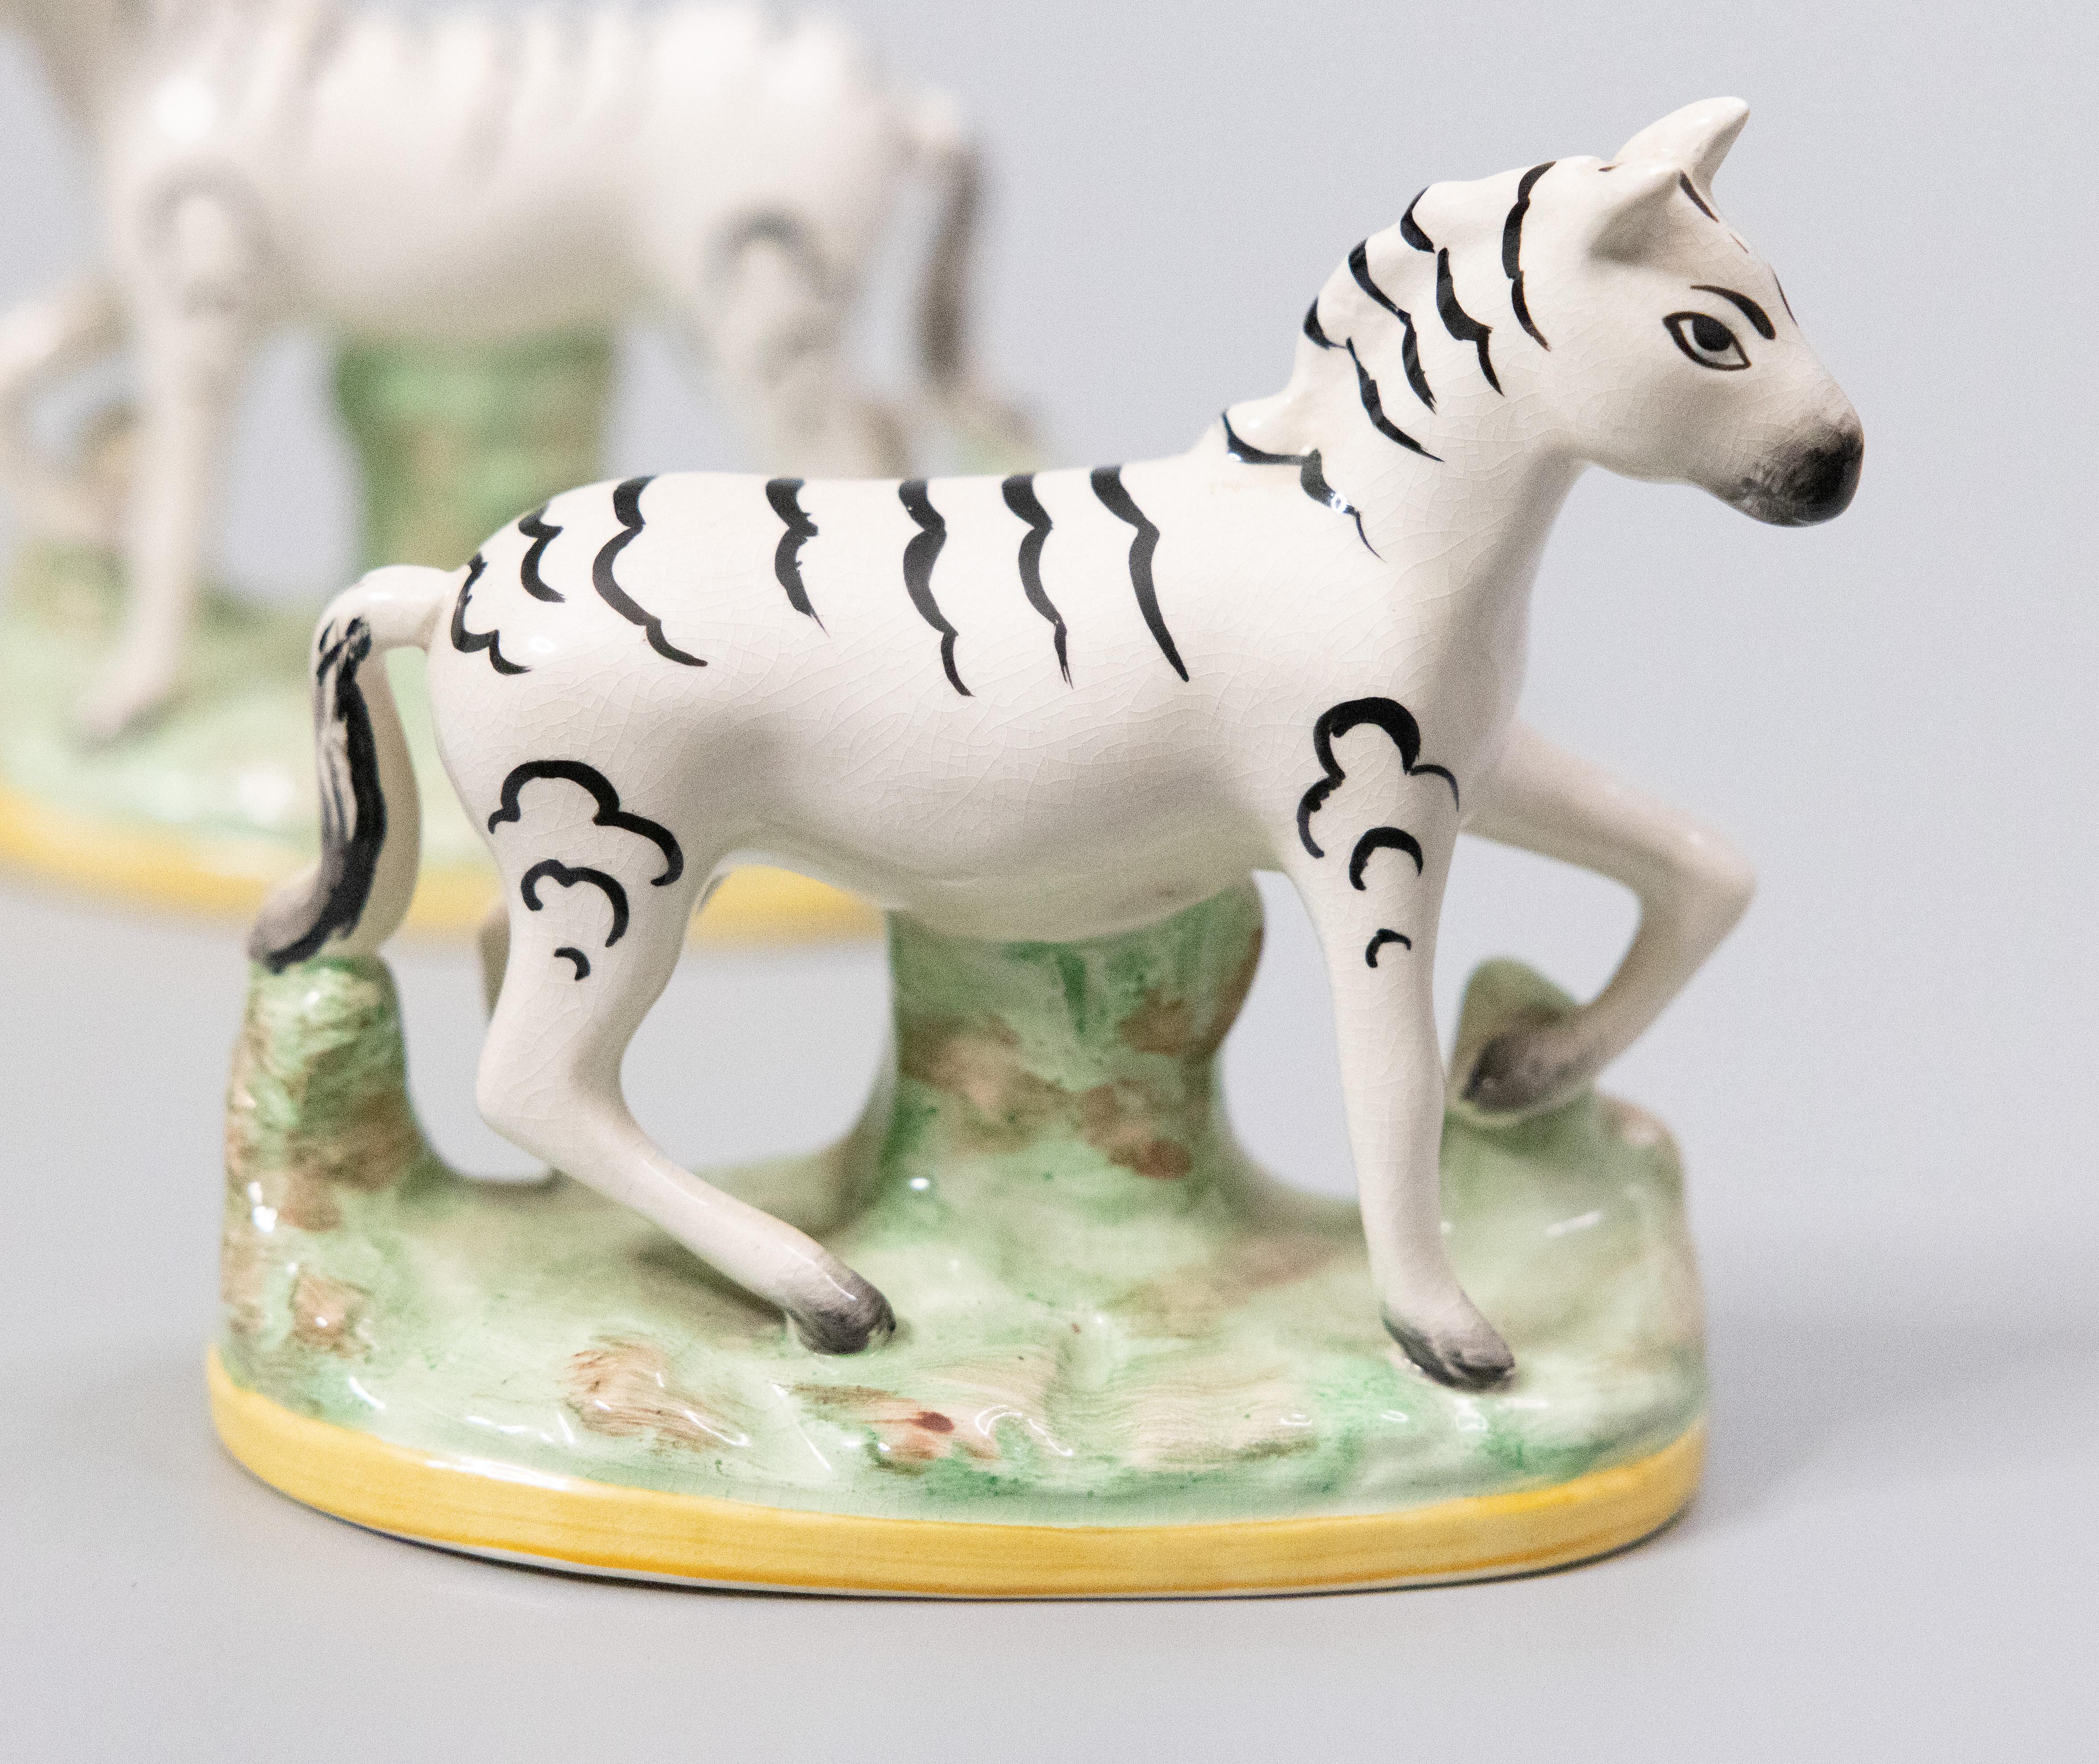 A superb pair of antique English Staffordshire zebra figurines, circa 1920. These charming zebras are hand painted with fine details and would be perfect for display or added to a collection.